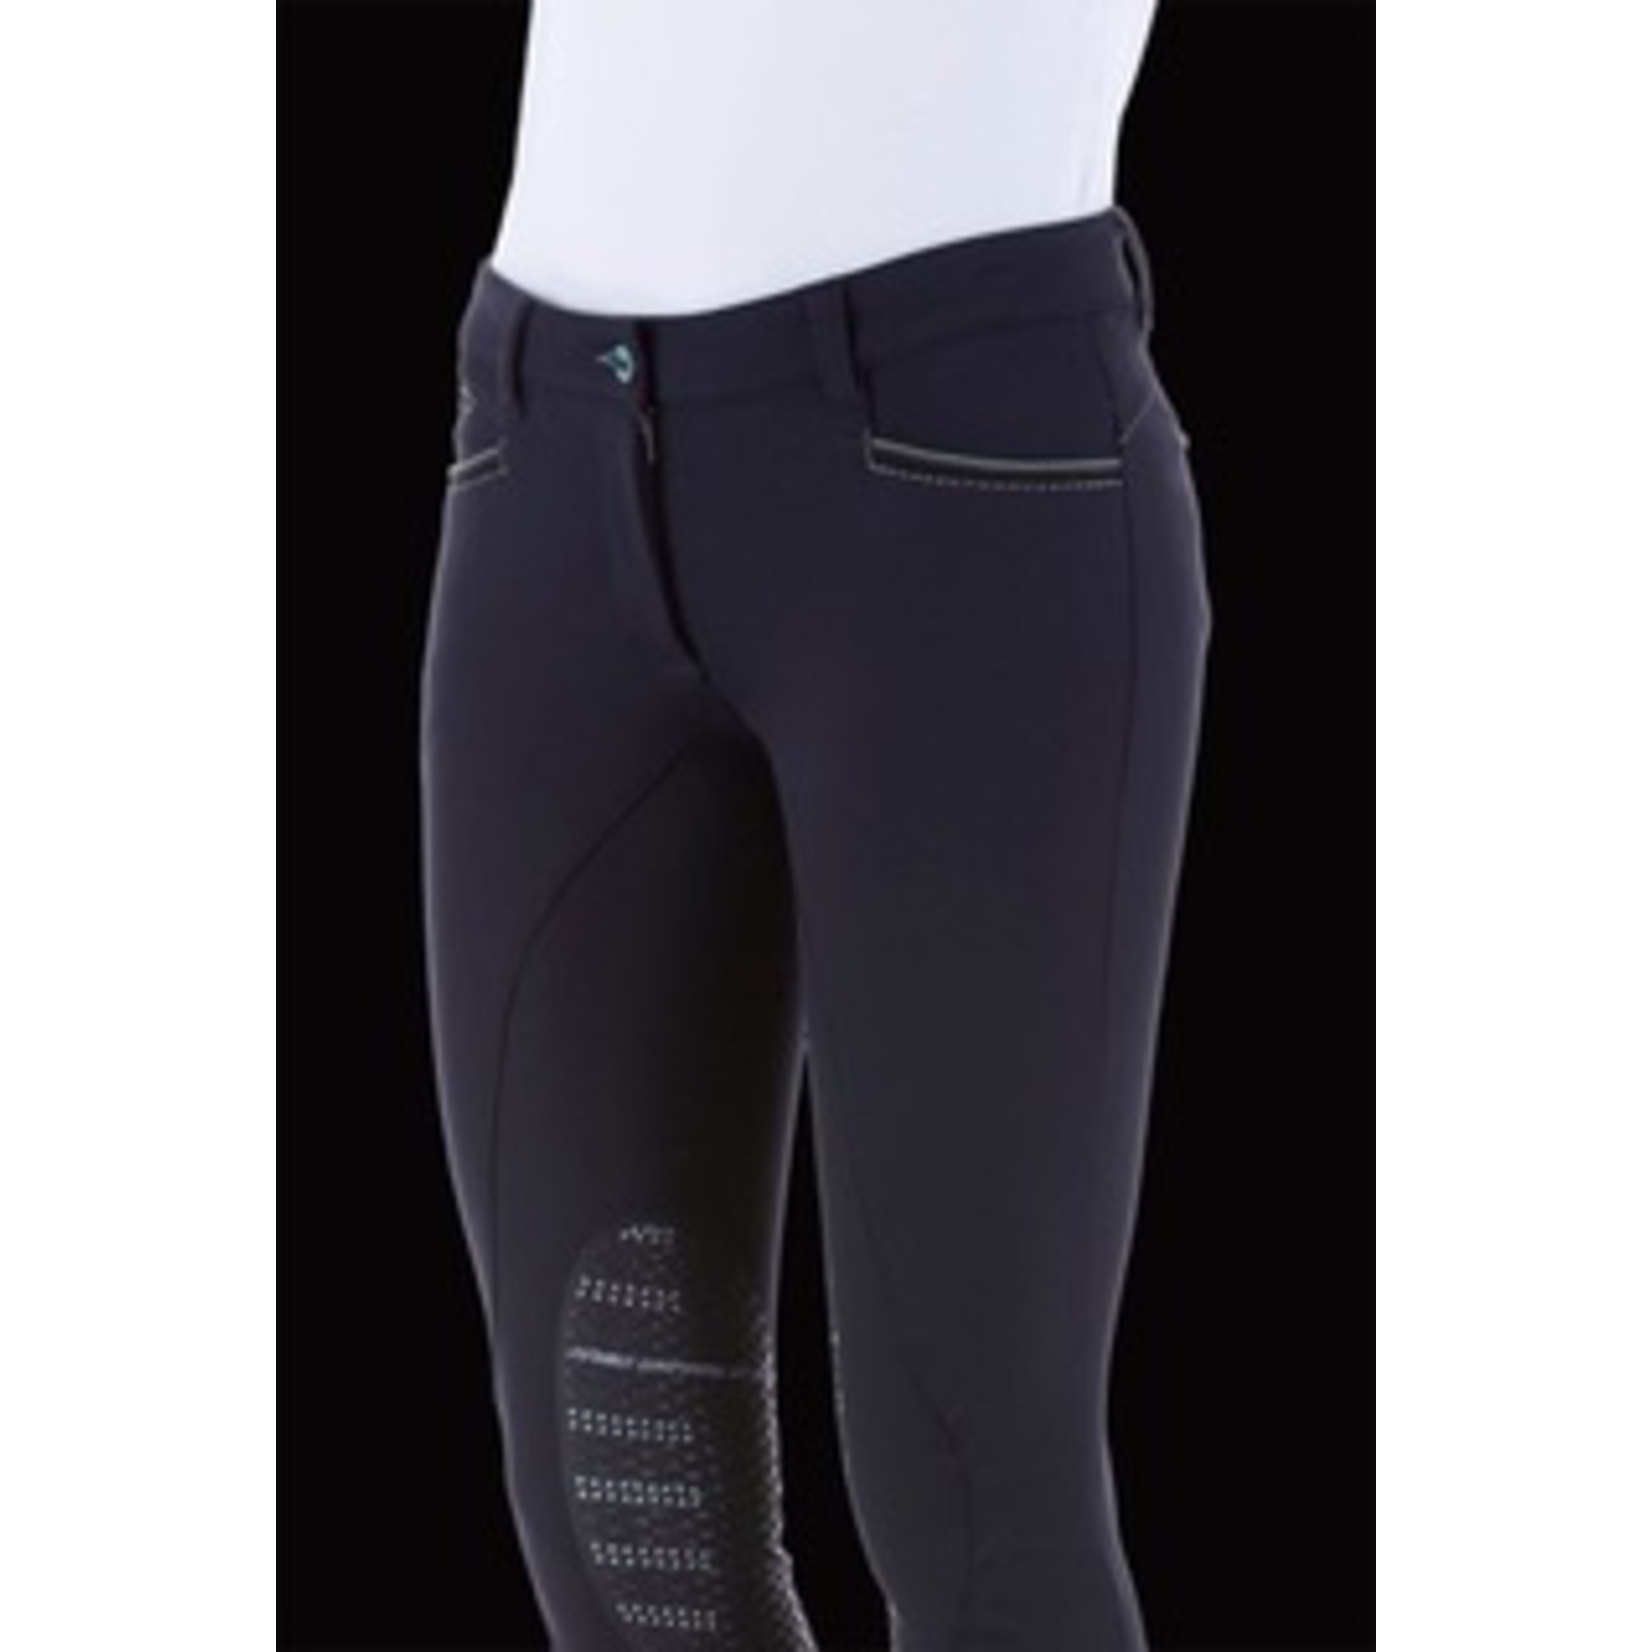 Animo Nartaz Knee Patch Breeches with Animo Gripping System